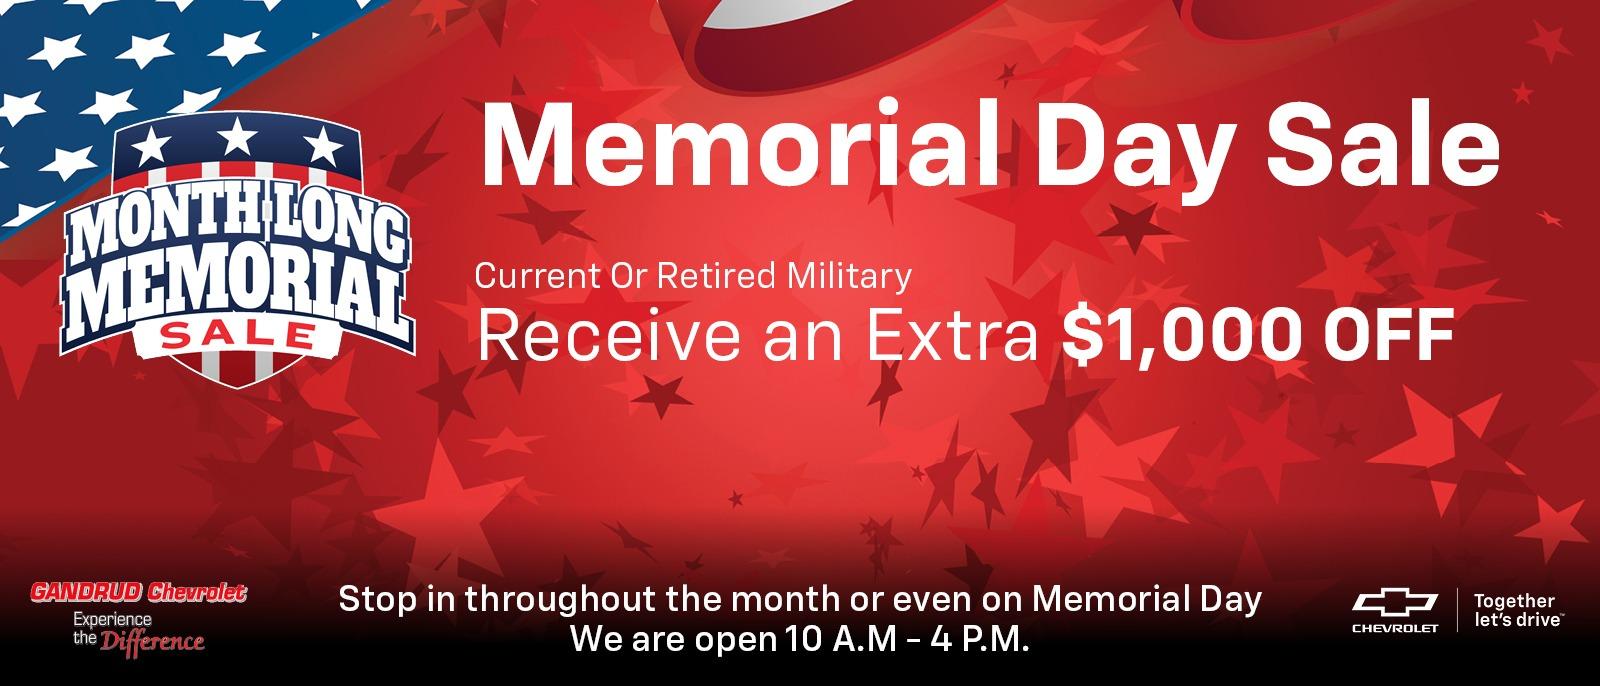 Memorial Day Sale for Current or Retired Military - Receive an Extra $1000 OFF!